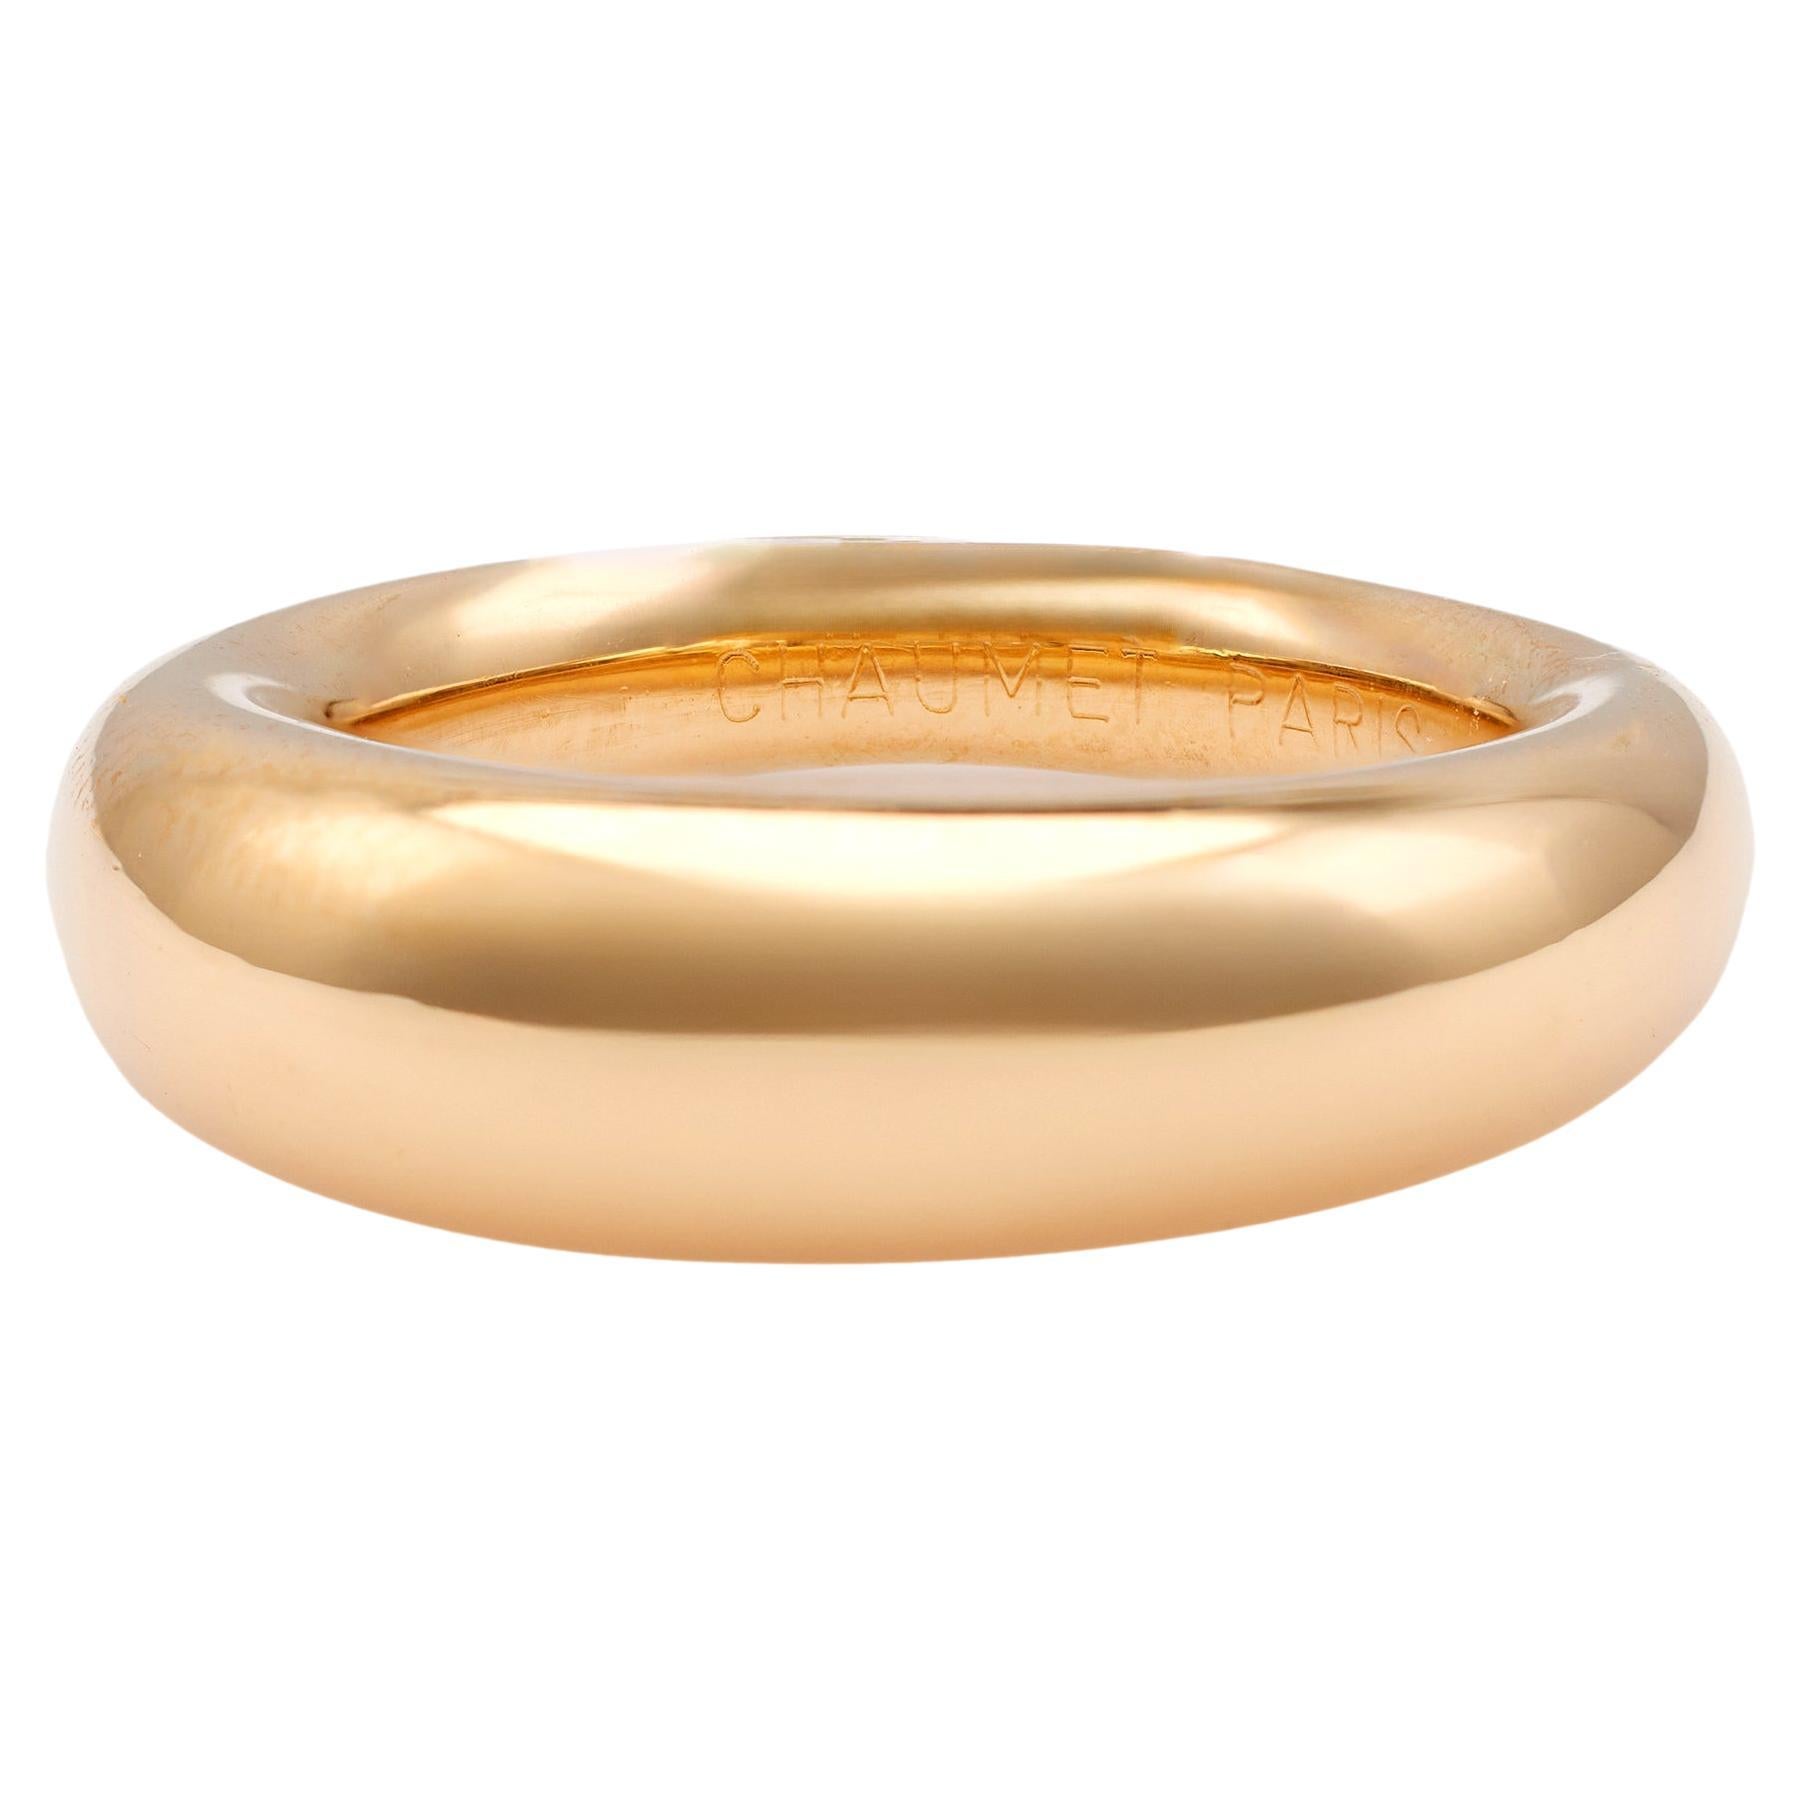 Vintage Chaumet 18k Yellow Gold Anneau Dome Ring